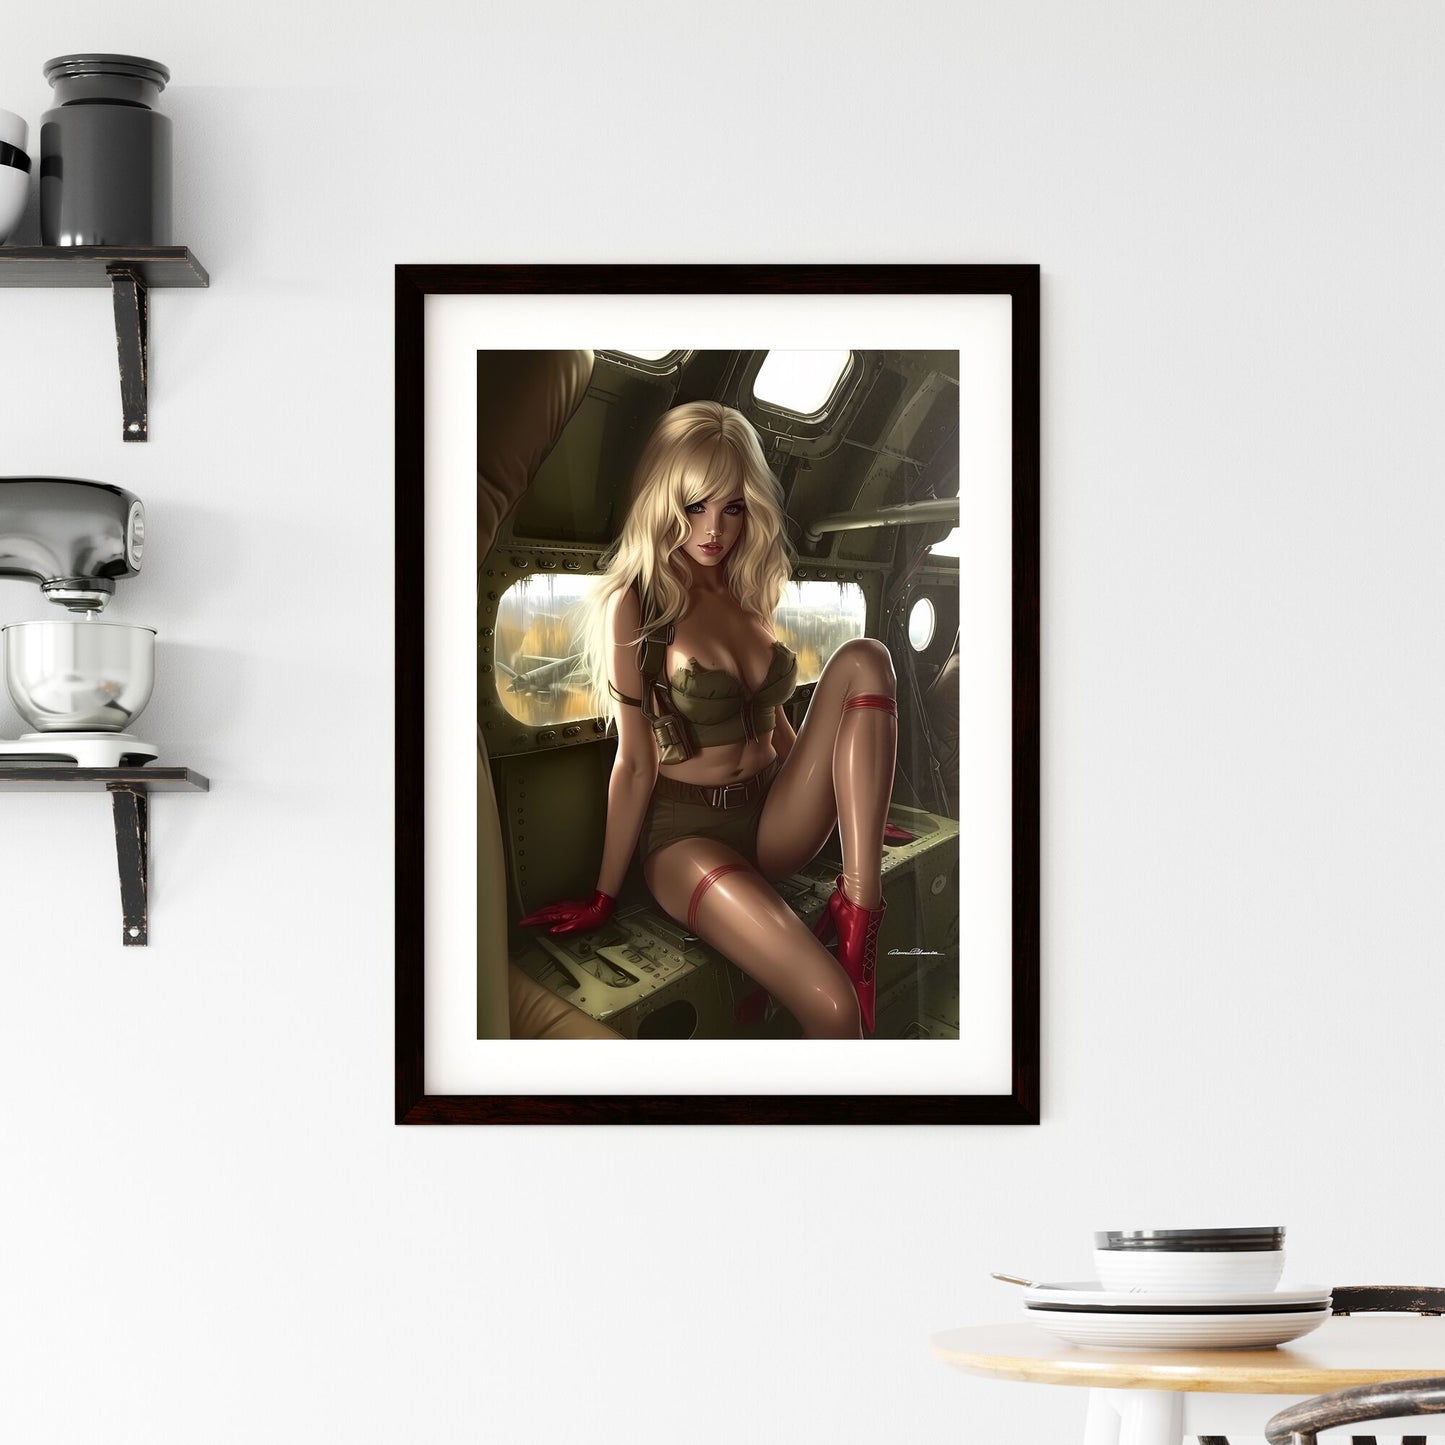 Blonde pin up girl in stockings with red high heels aviation style - Art print of a woman sitting in a plane Default Title